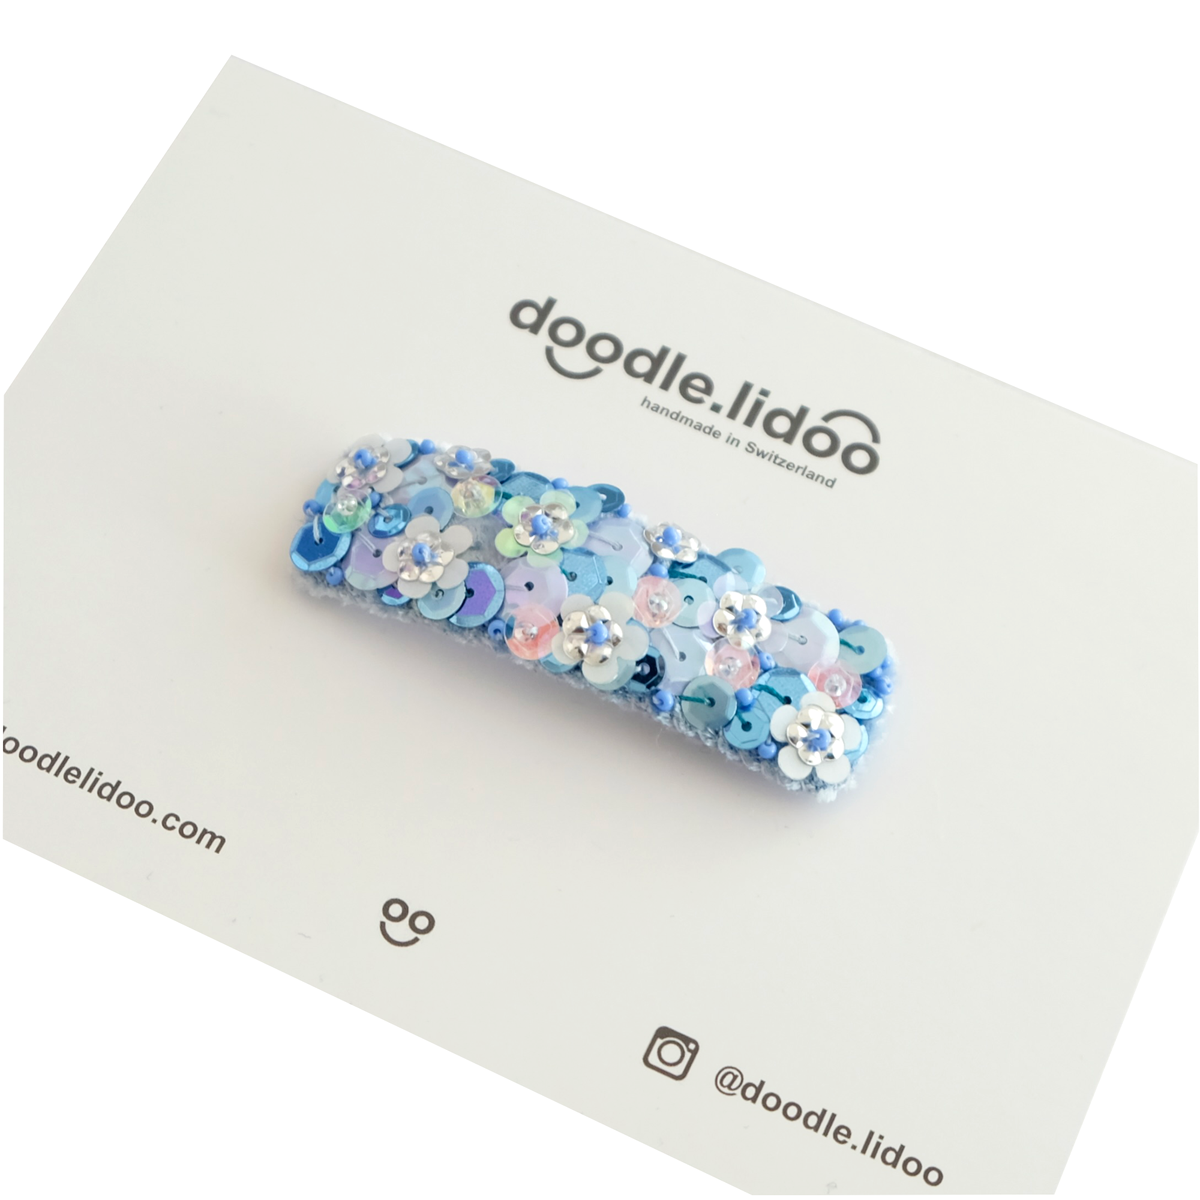 Retro hair clip in sky blue embellished with sequins.